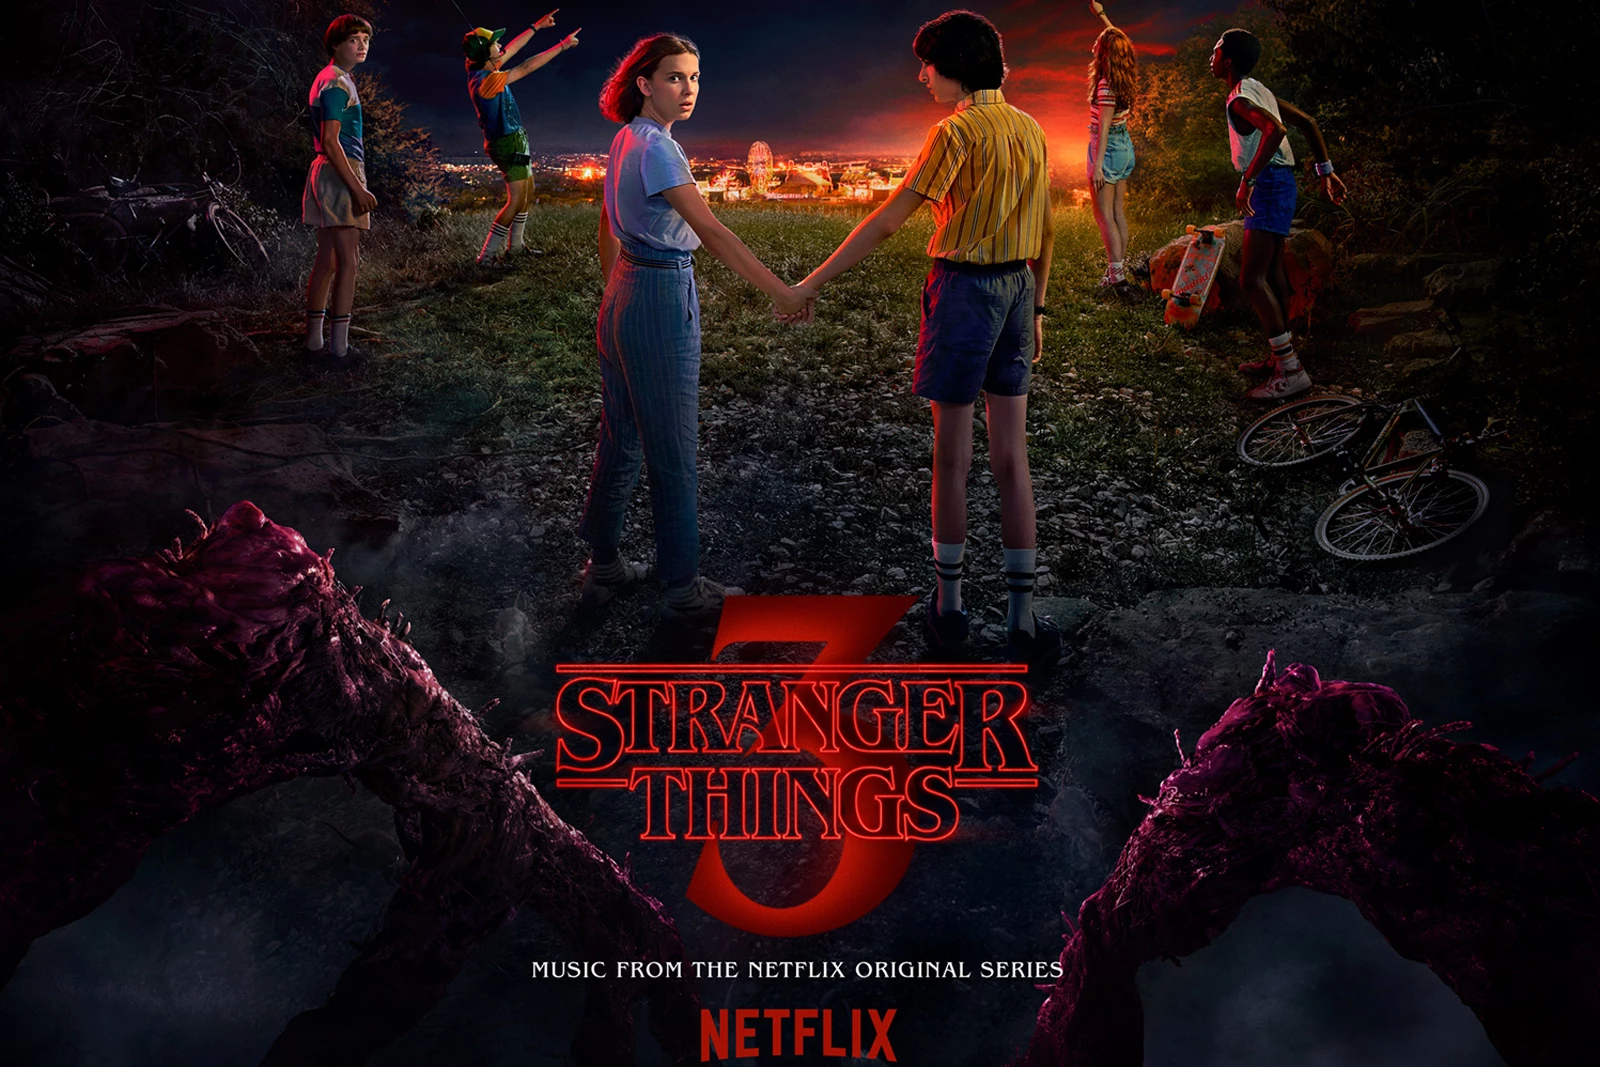 dud who dies at end of stranger things second season